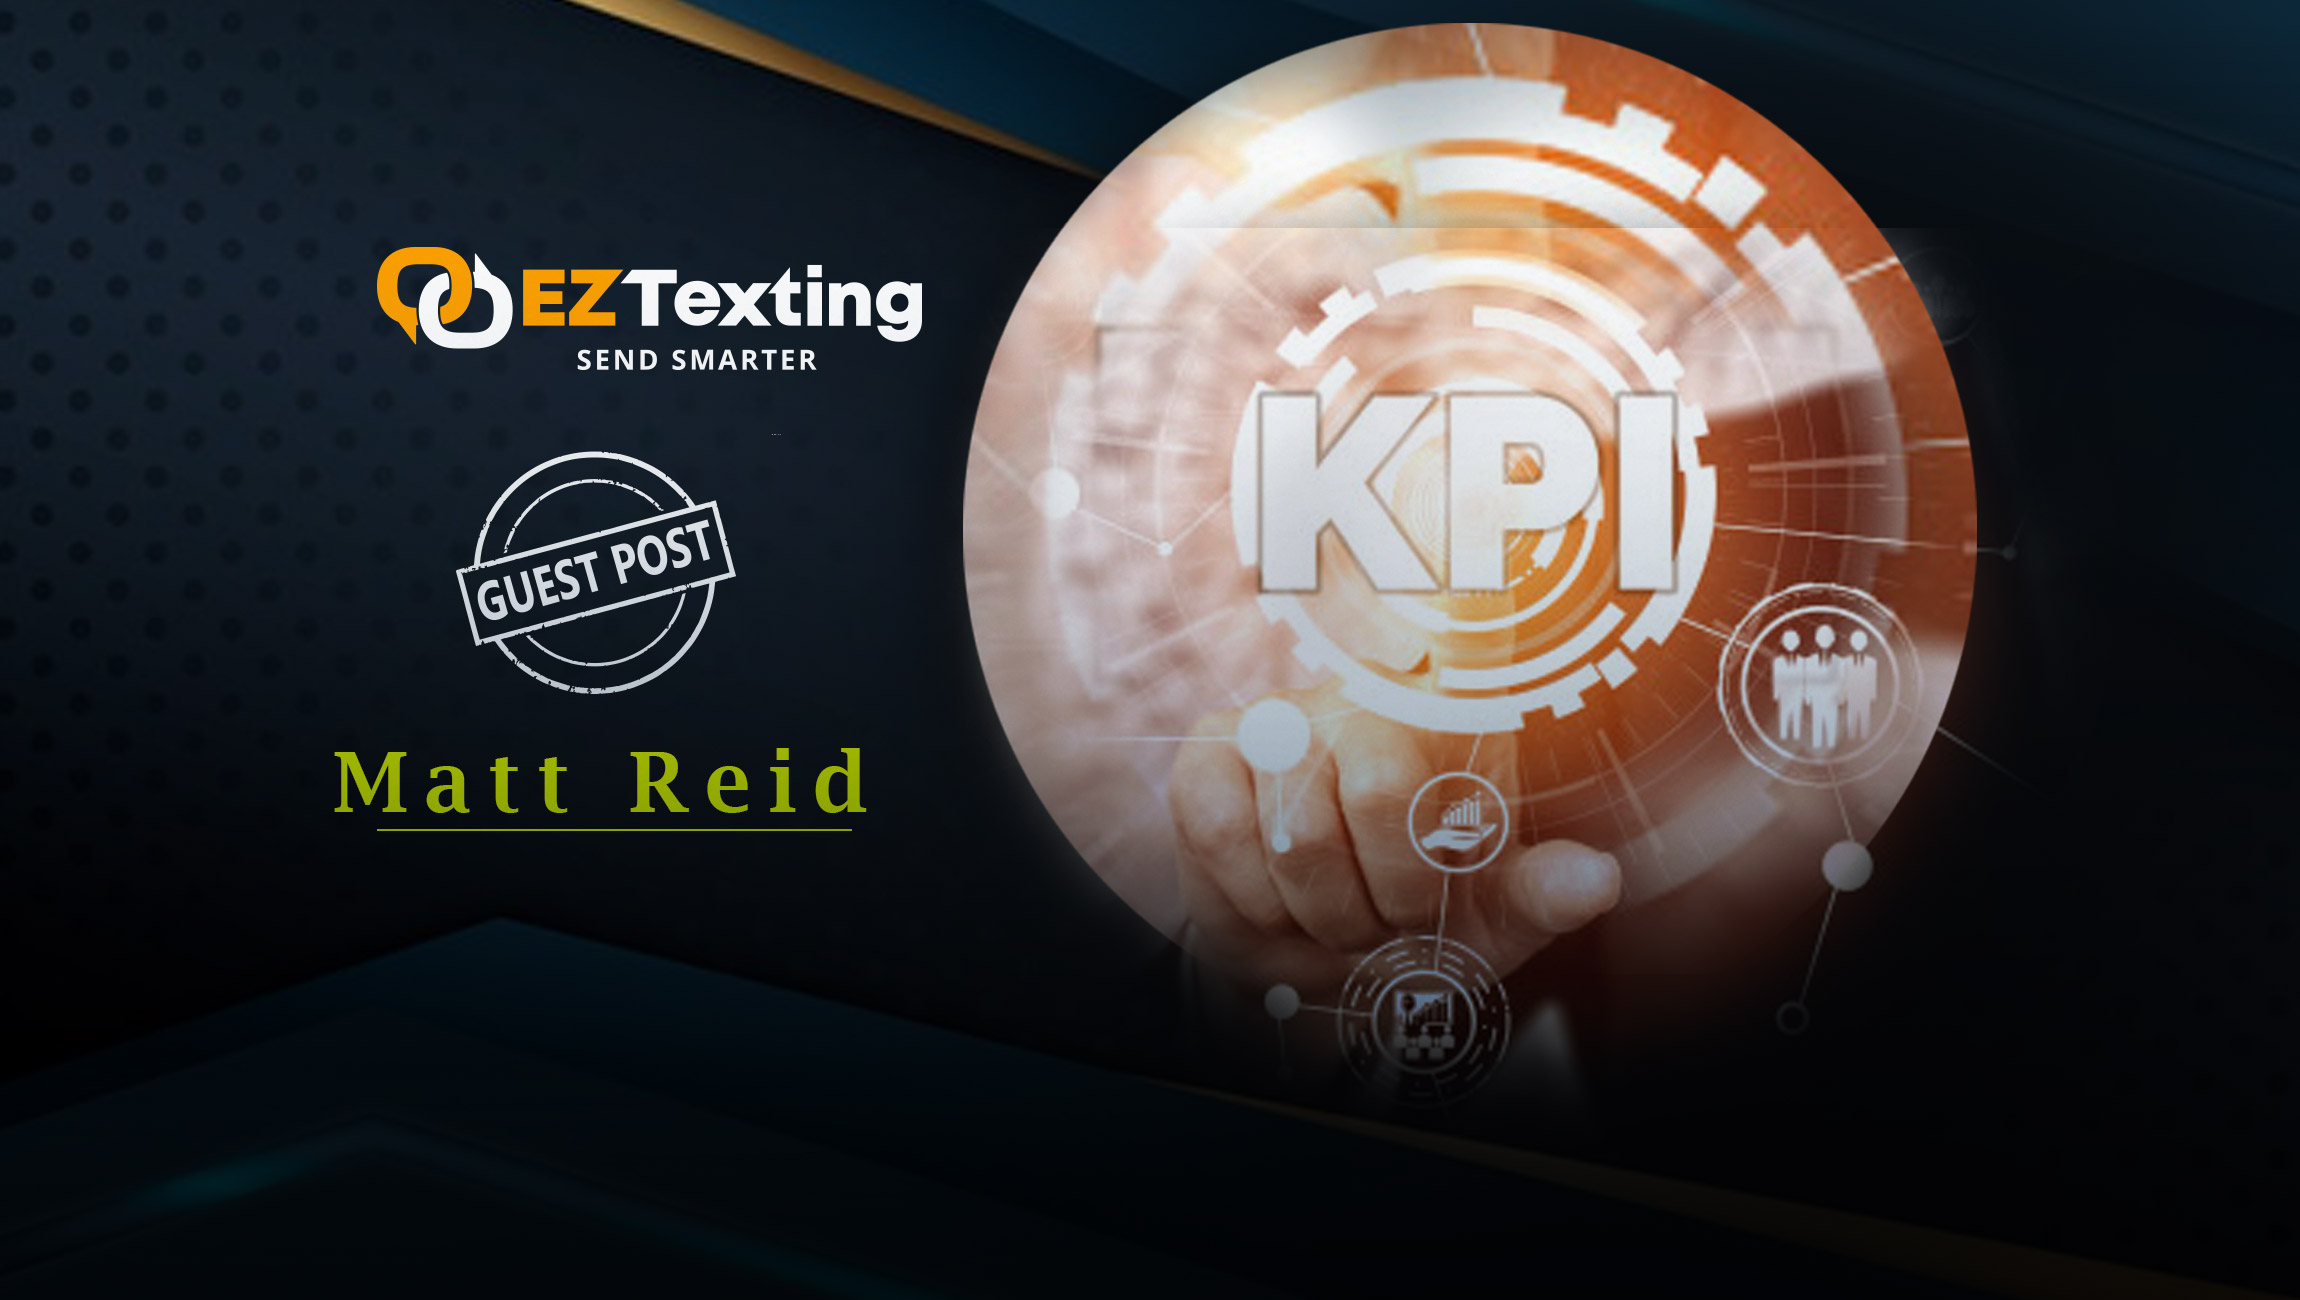 9 Marketing KPIs You Should Be Crushing The Analytics Every Business Should Monitor By Matt Reid, CMO of EZ Texting